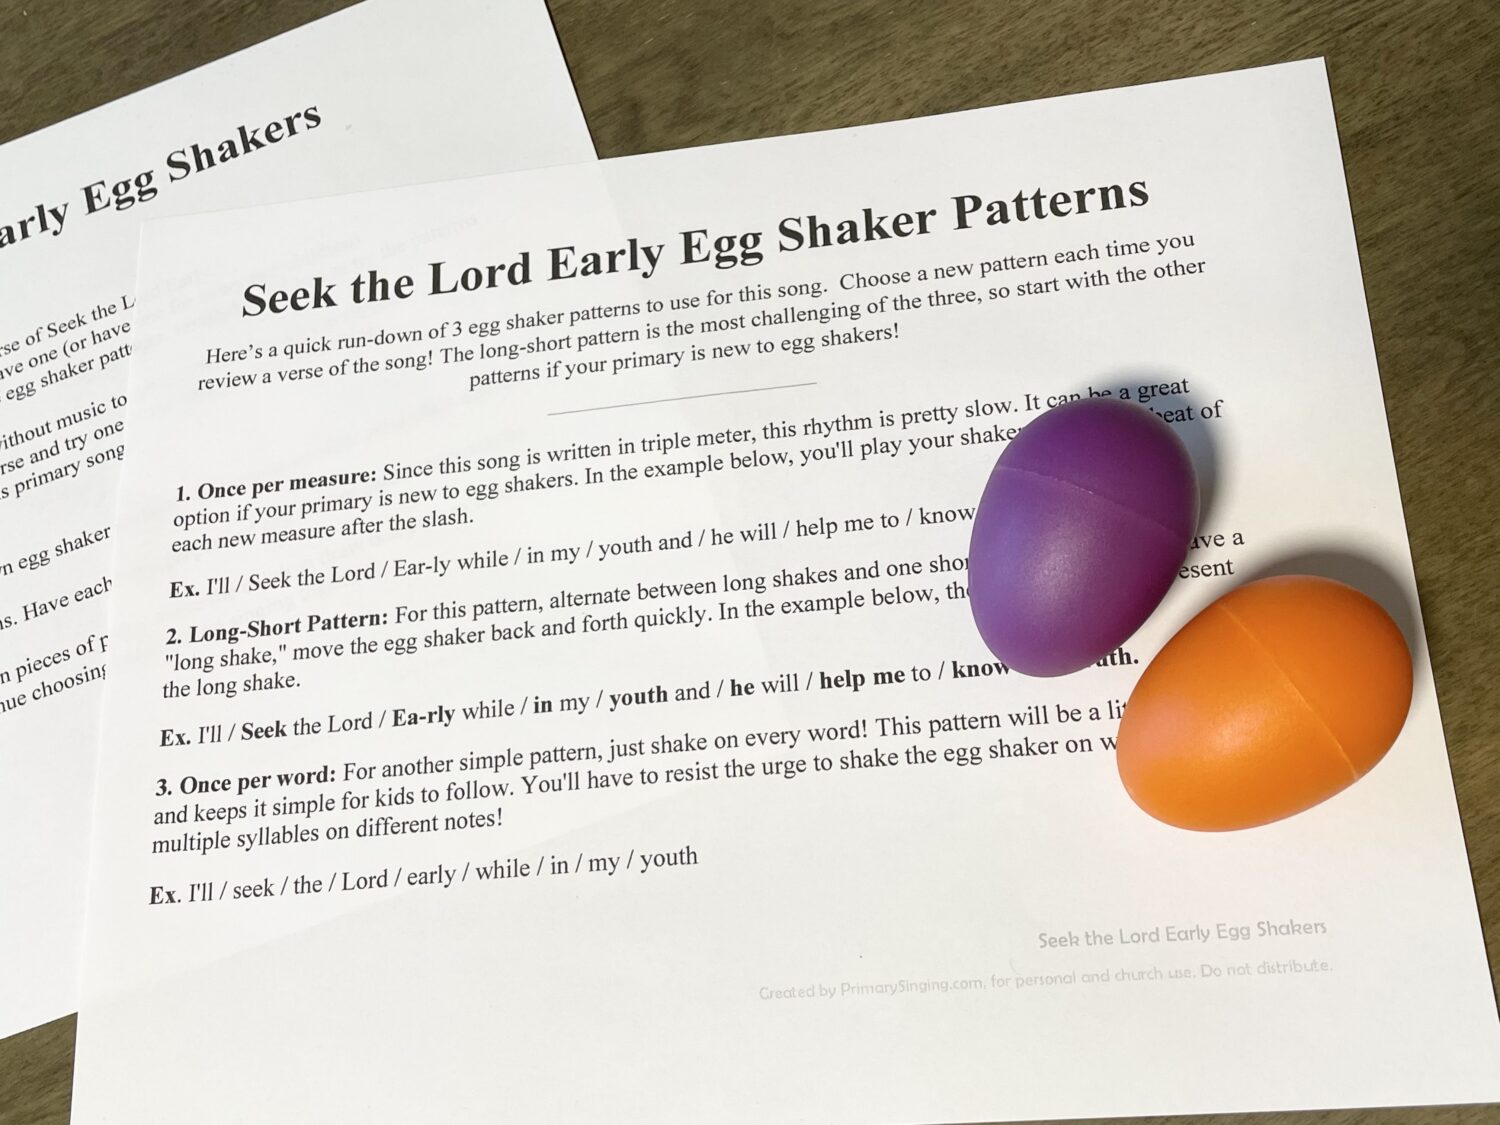 Seek the Lord Early Egg Shakers singing time idea for LDS Primary Music Leaders